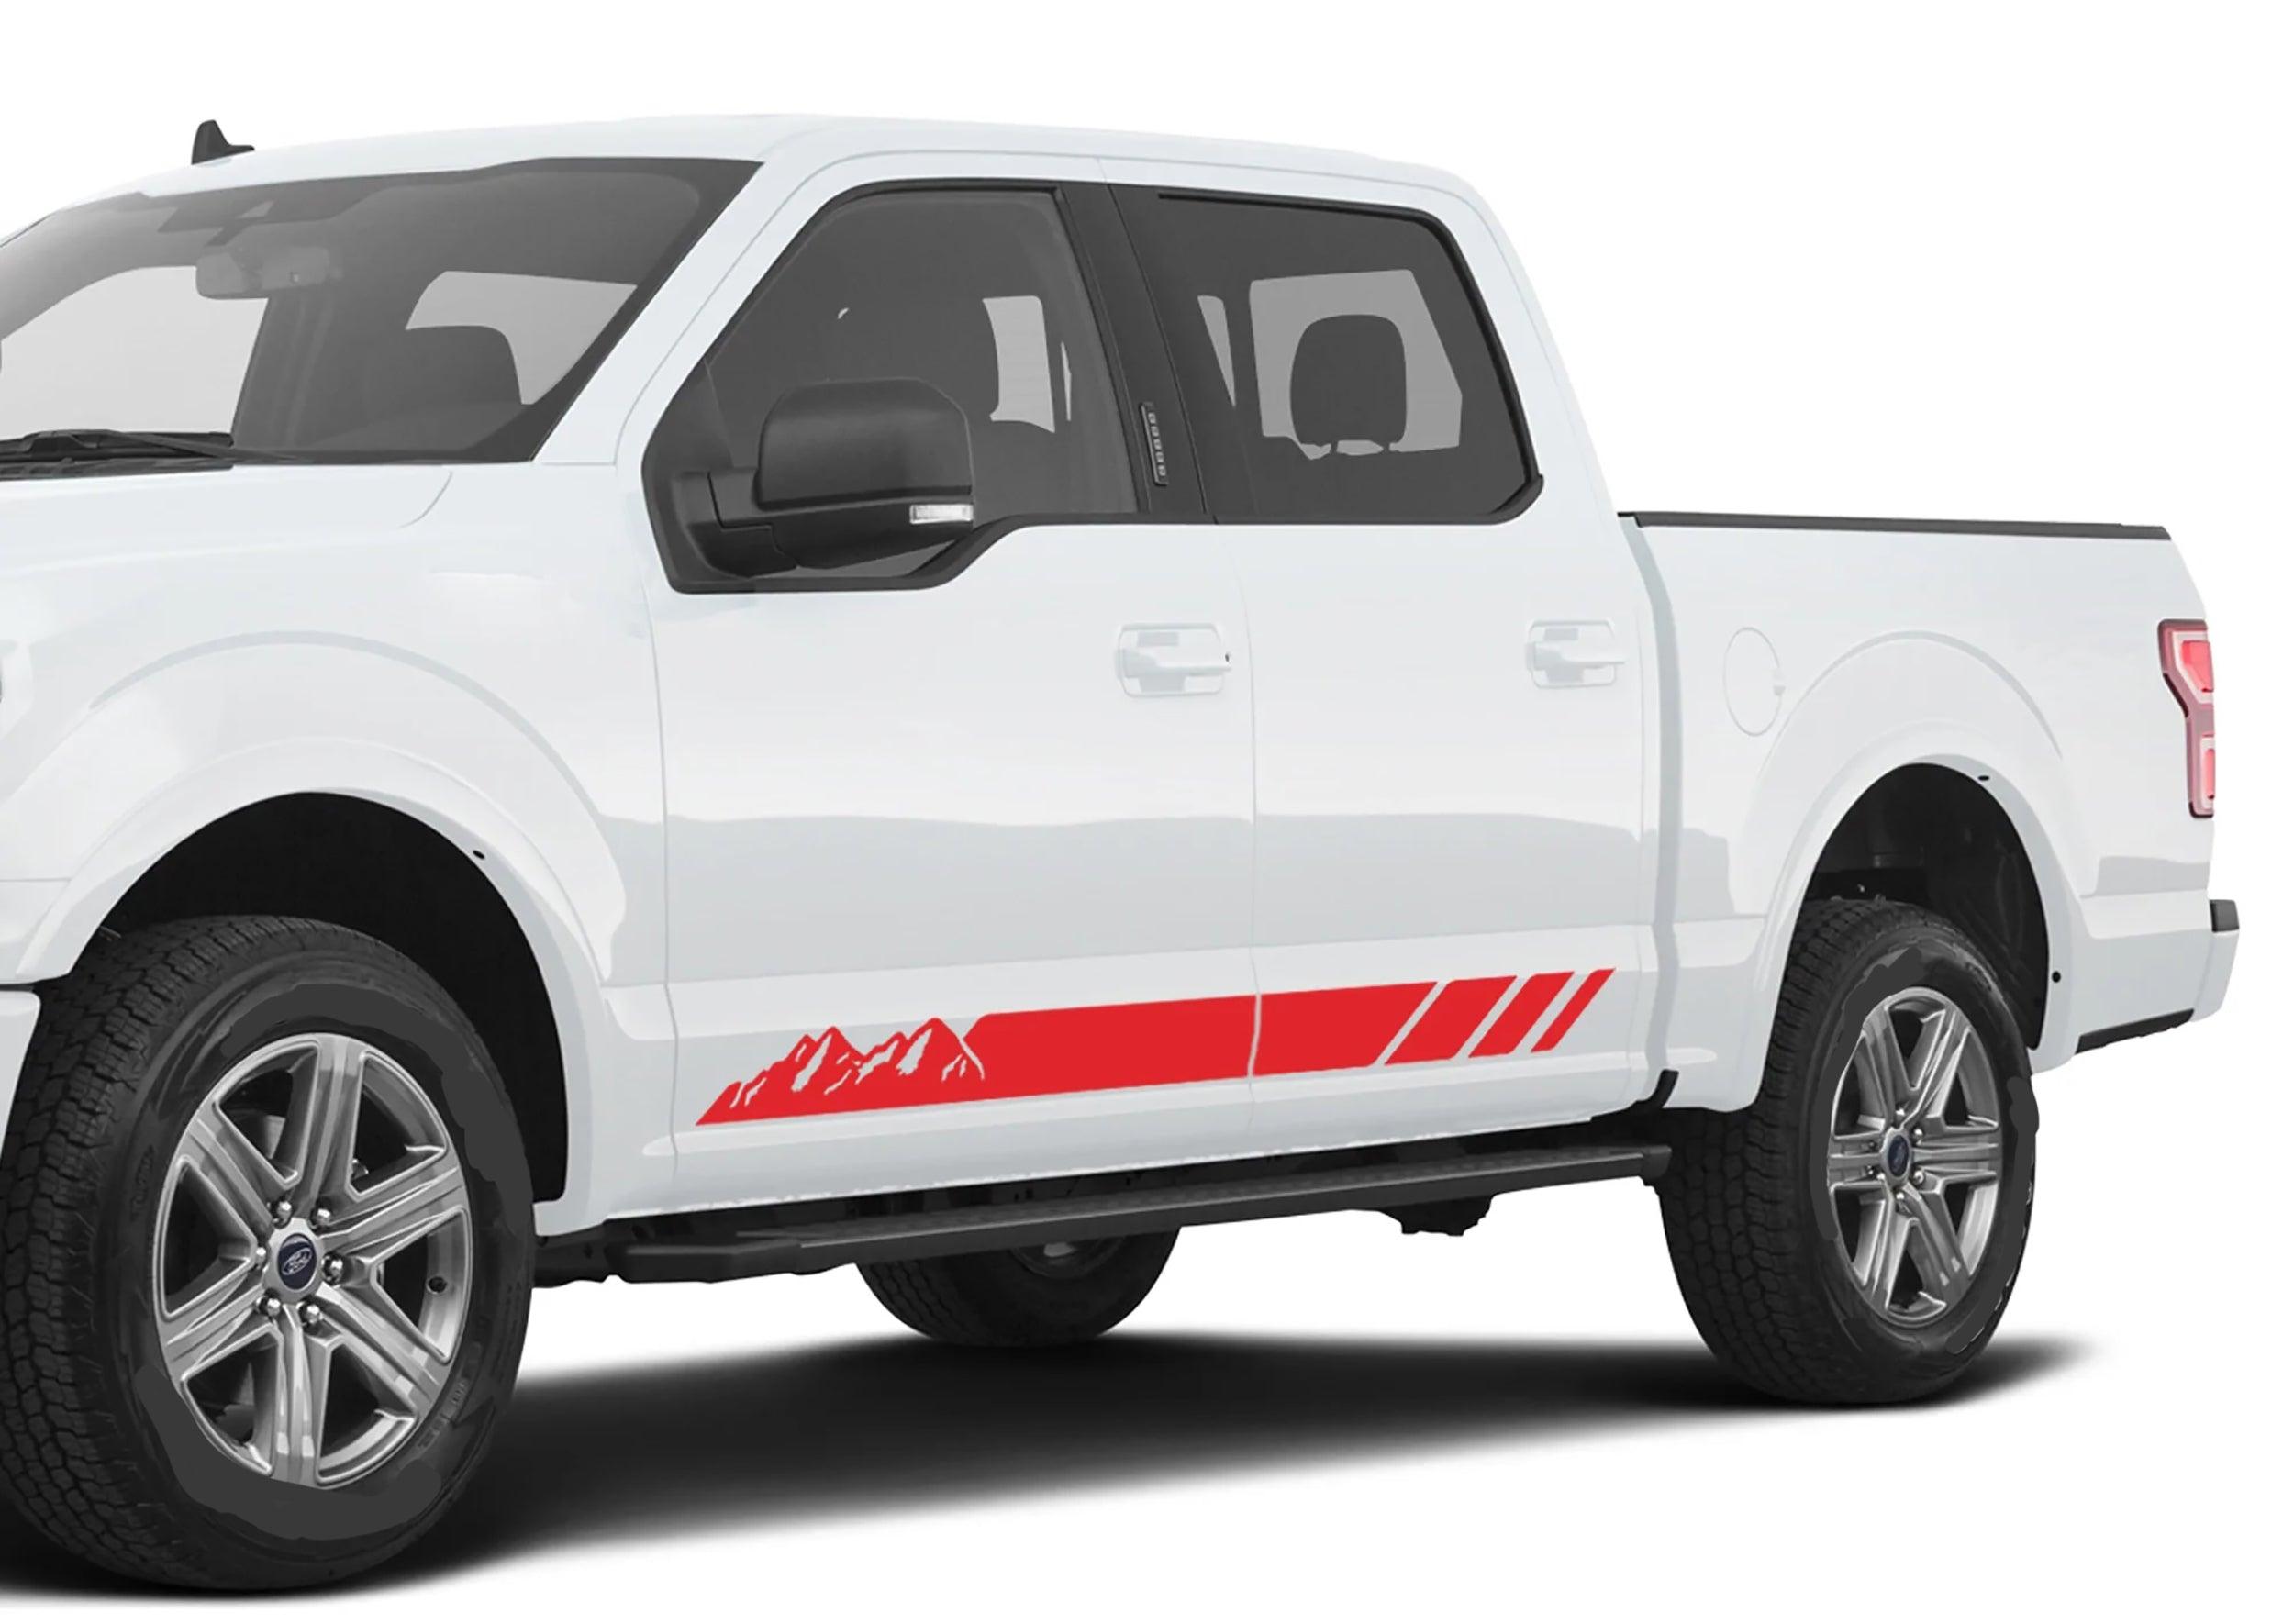 Ford F-150 (2015-2020) Custom Decals, Graphics and Stickers - Mountain Rocker Stripe Kit - Jkprostickers